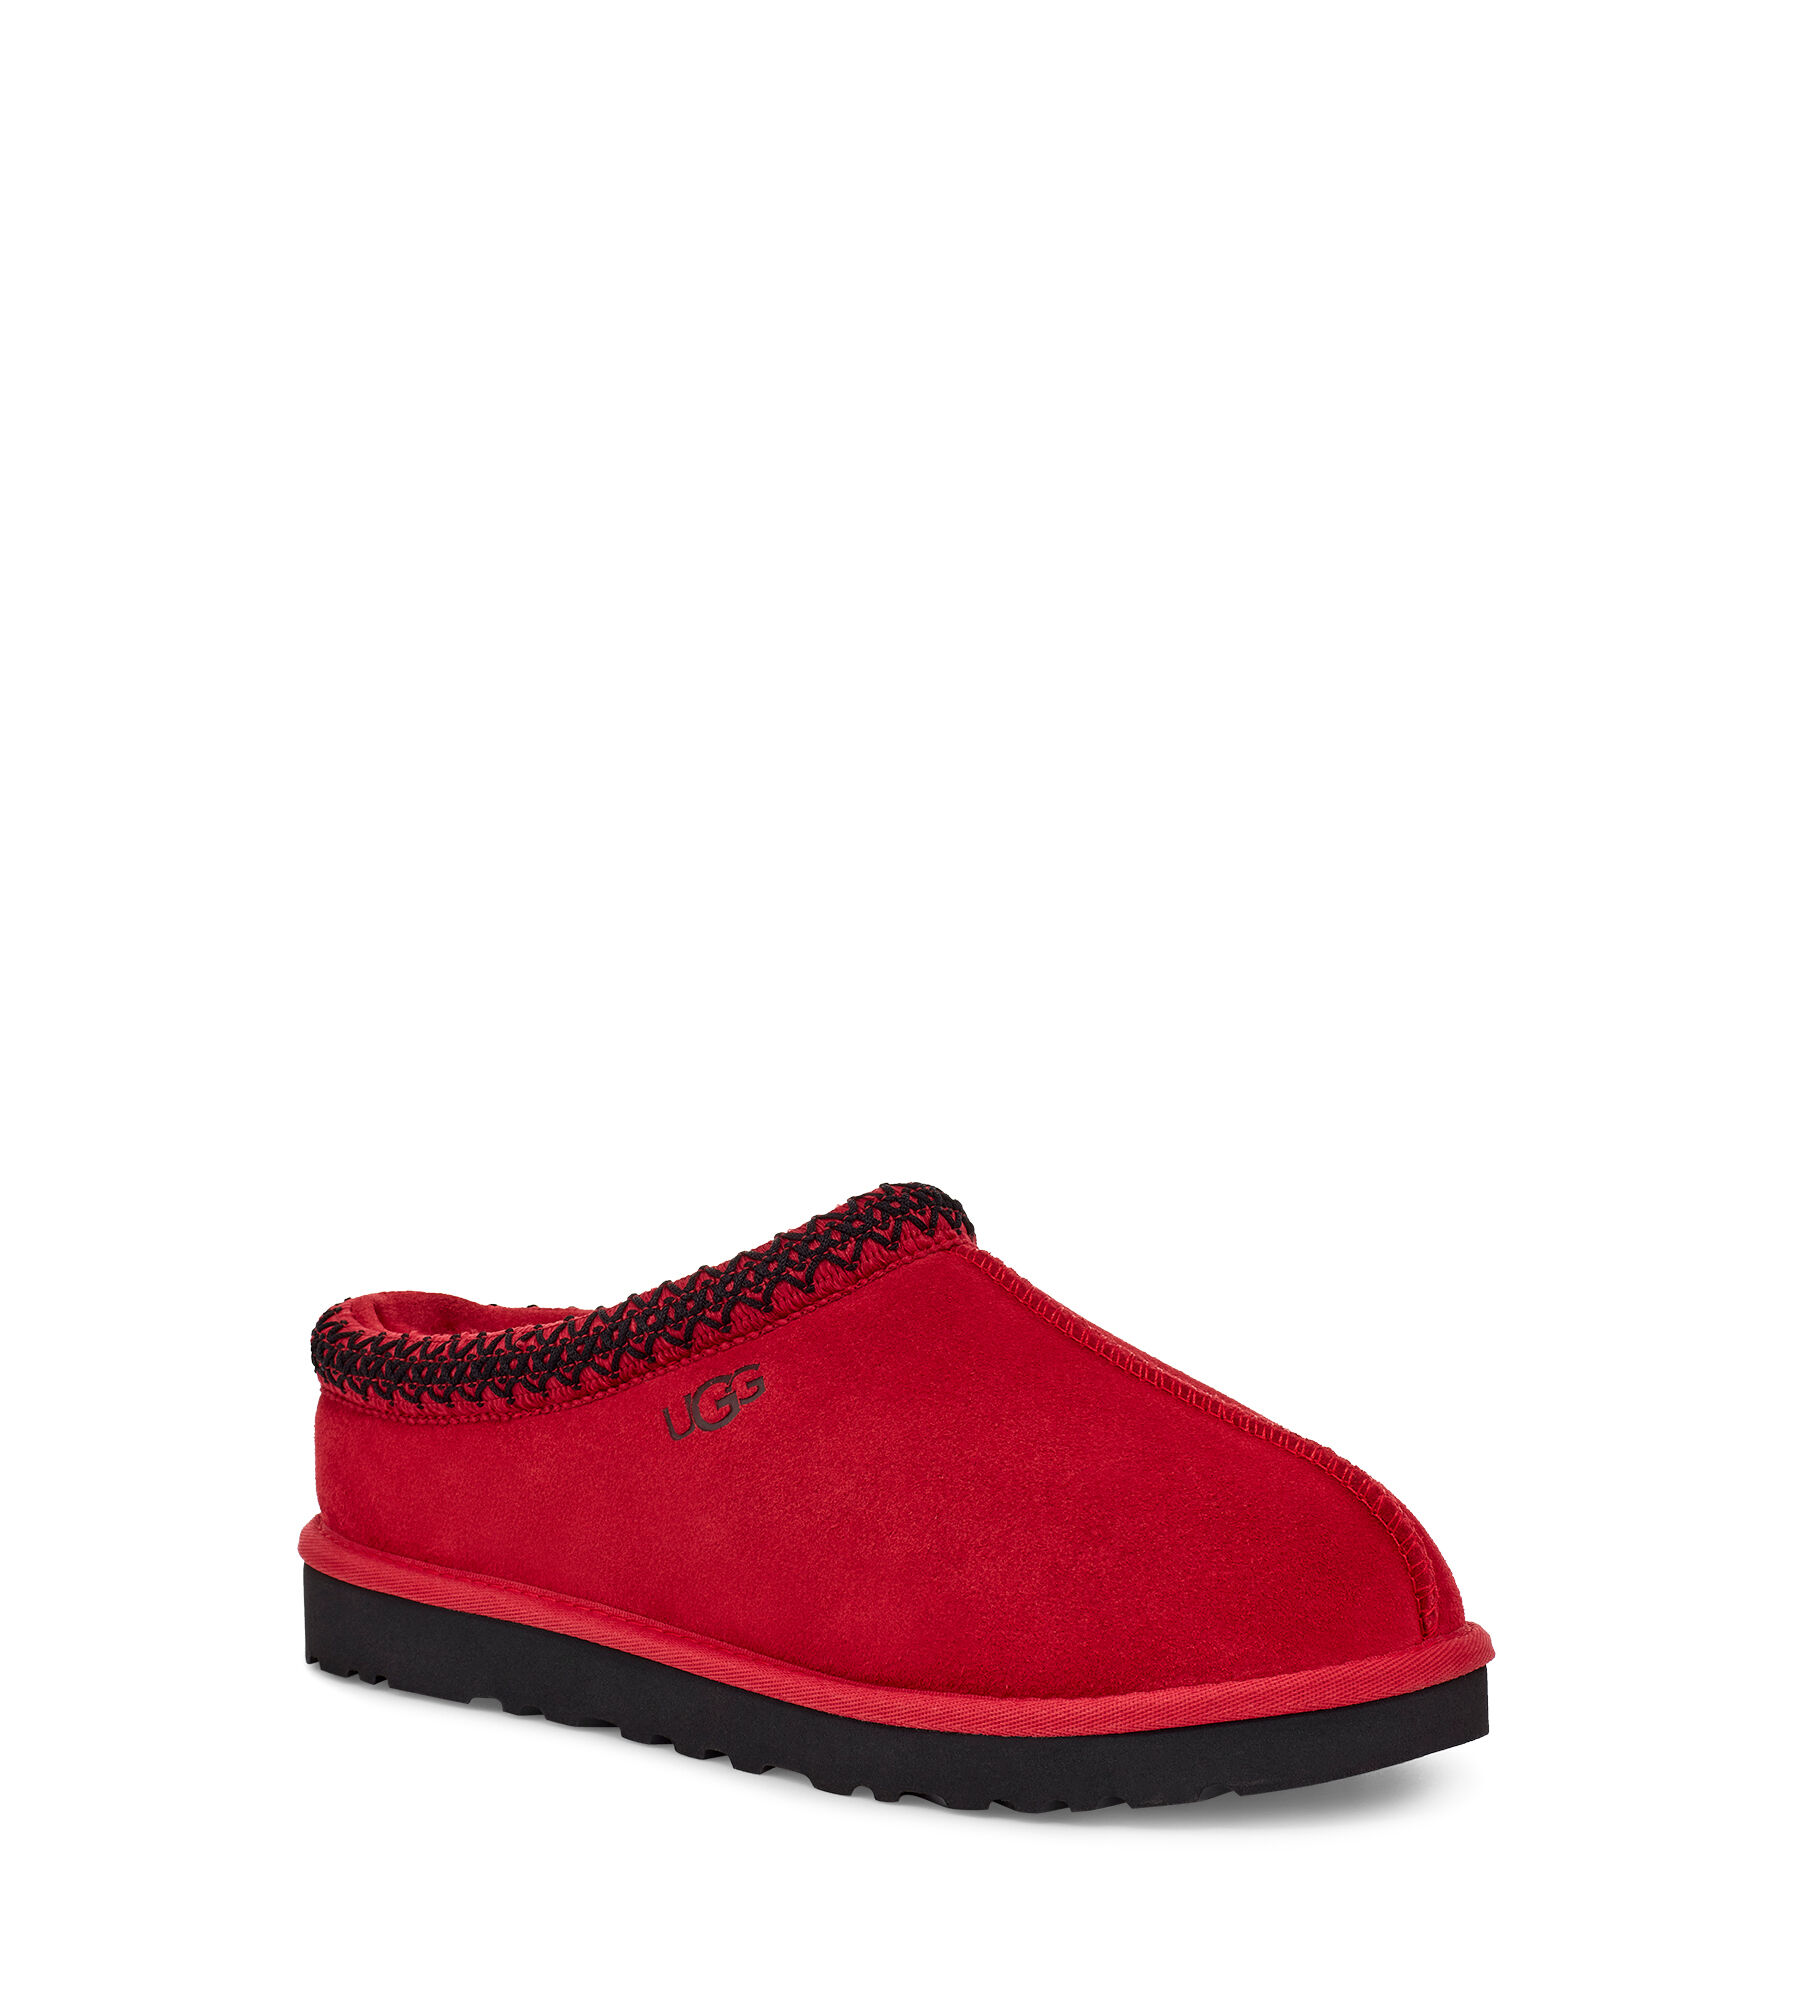 red ugg slippers